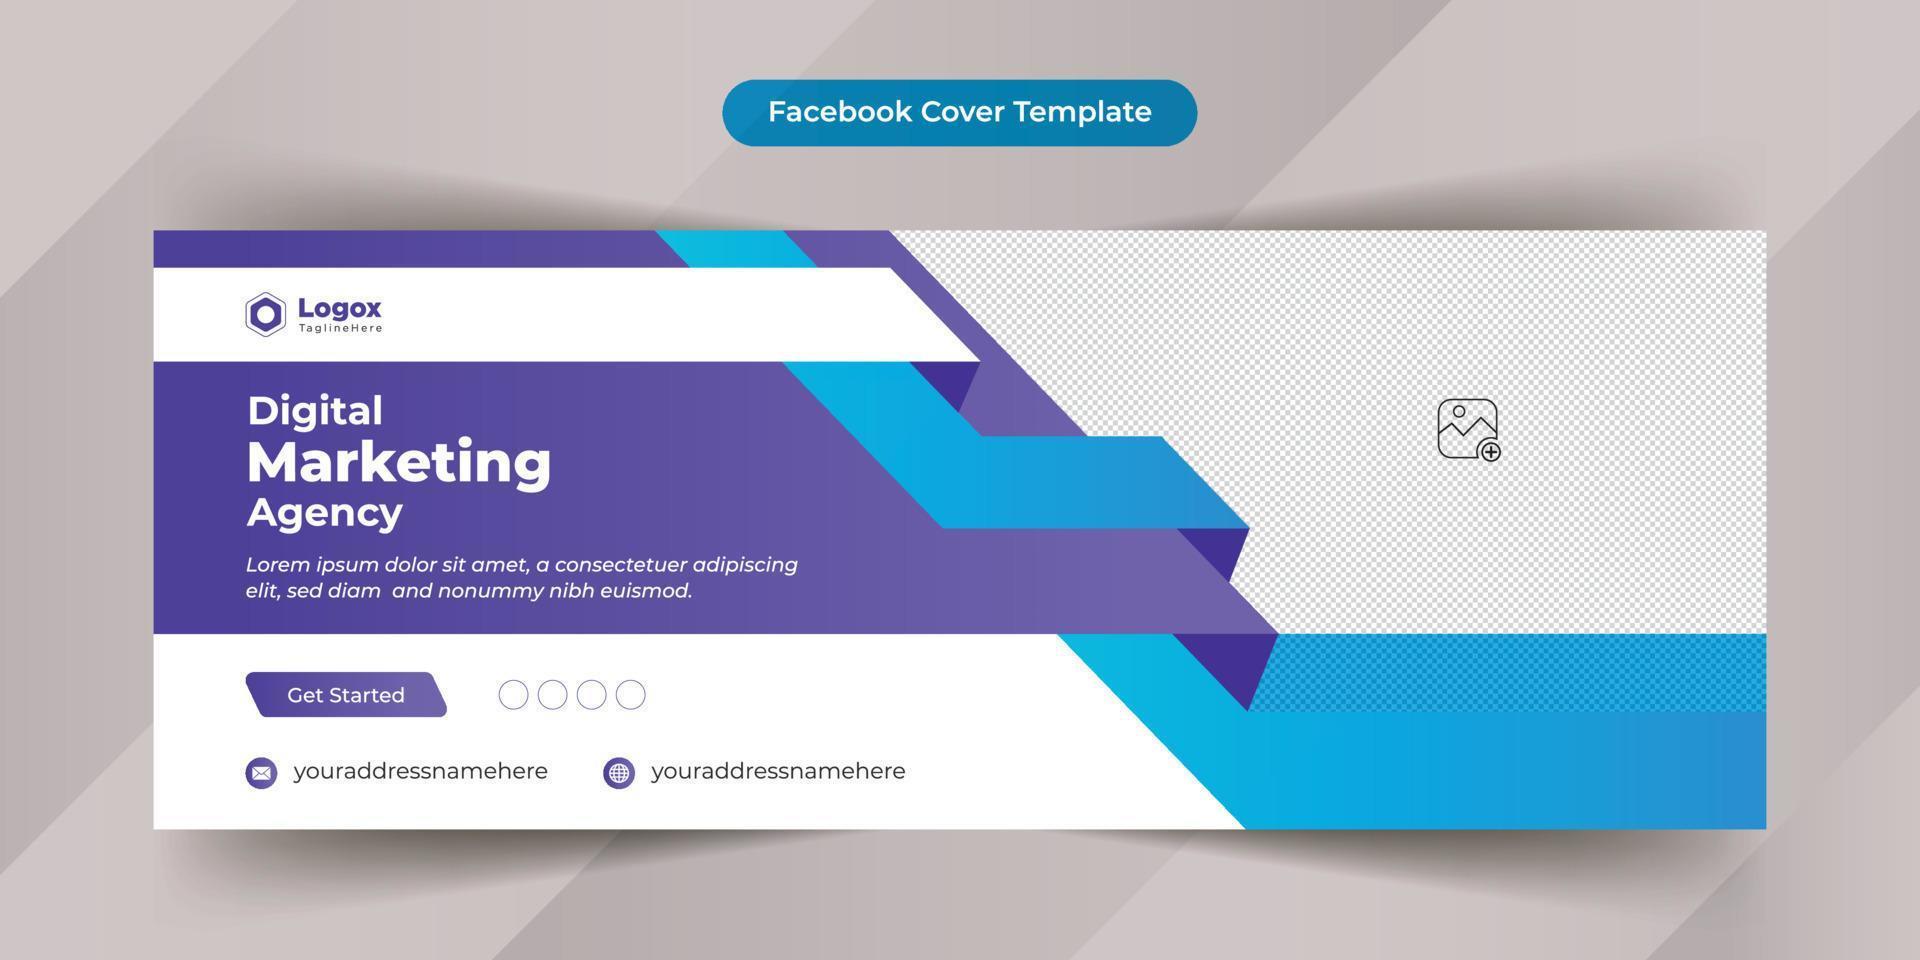 Corporate Cover Banner Template Design vector